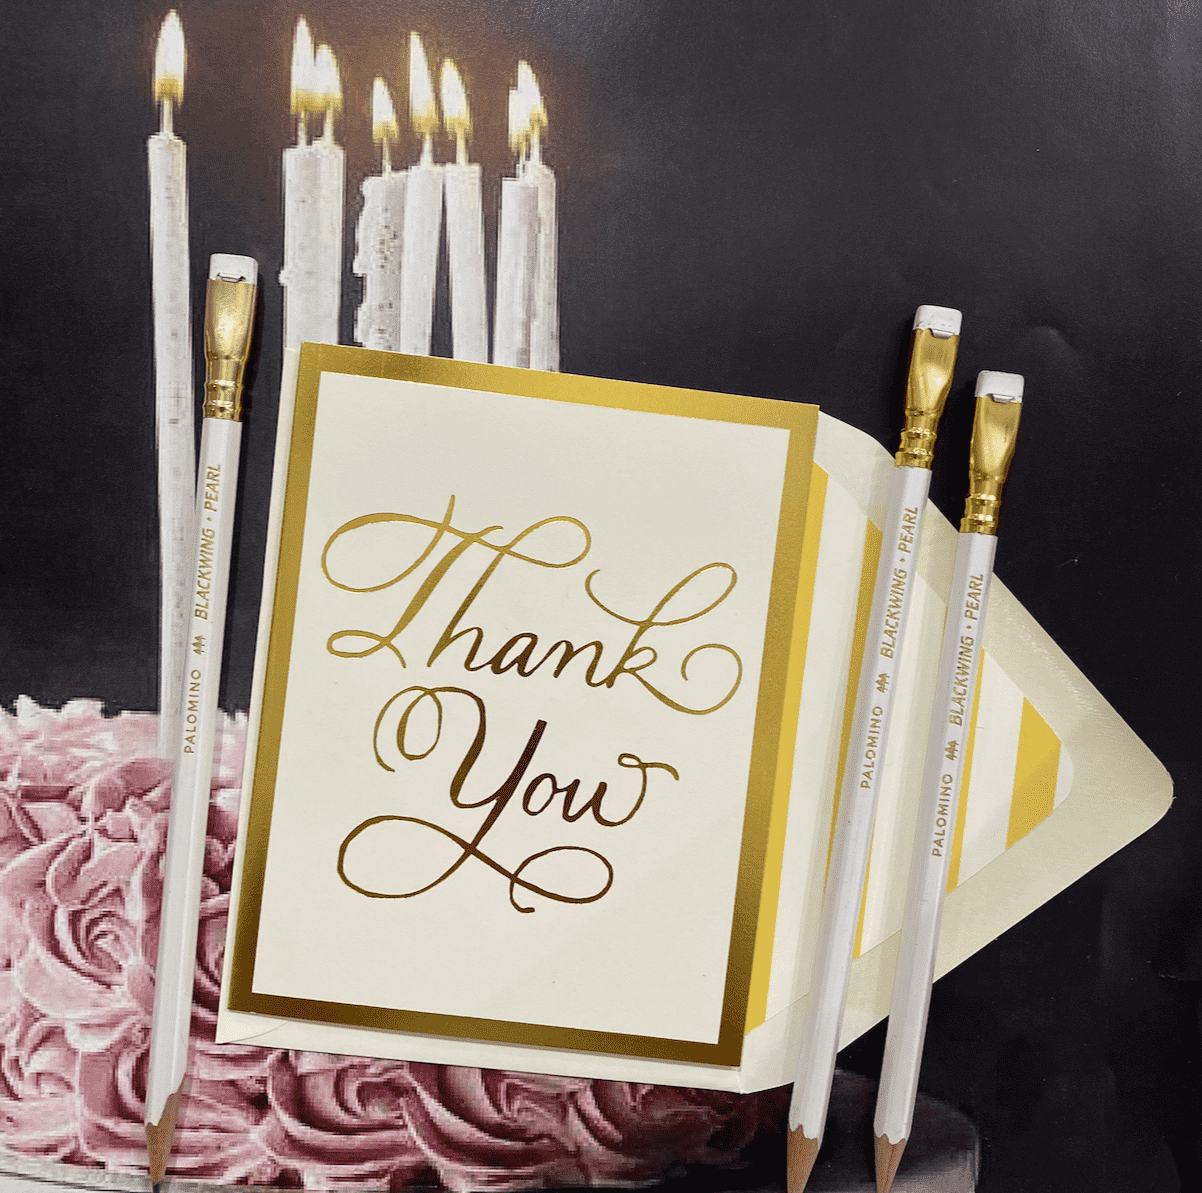 Thank You Fancy Script Greeting Card, Single Folded Card or Boxed Set of 8 - Bensgarden.com